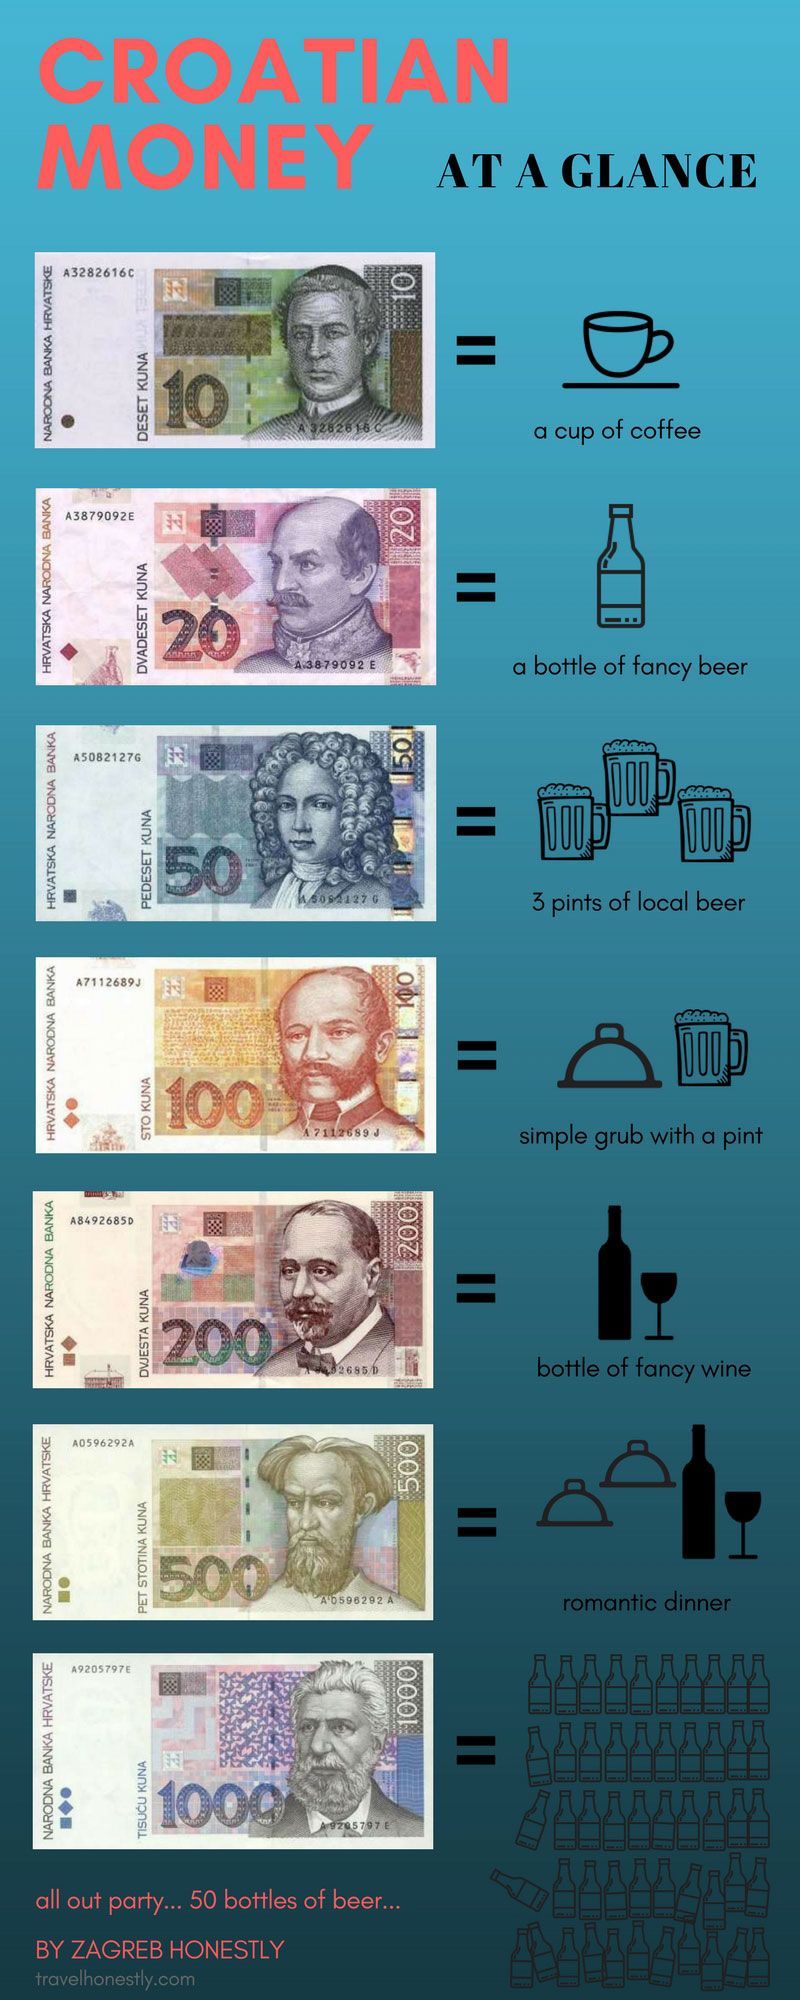 Croatian money: 17 useful and strange facts you should know